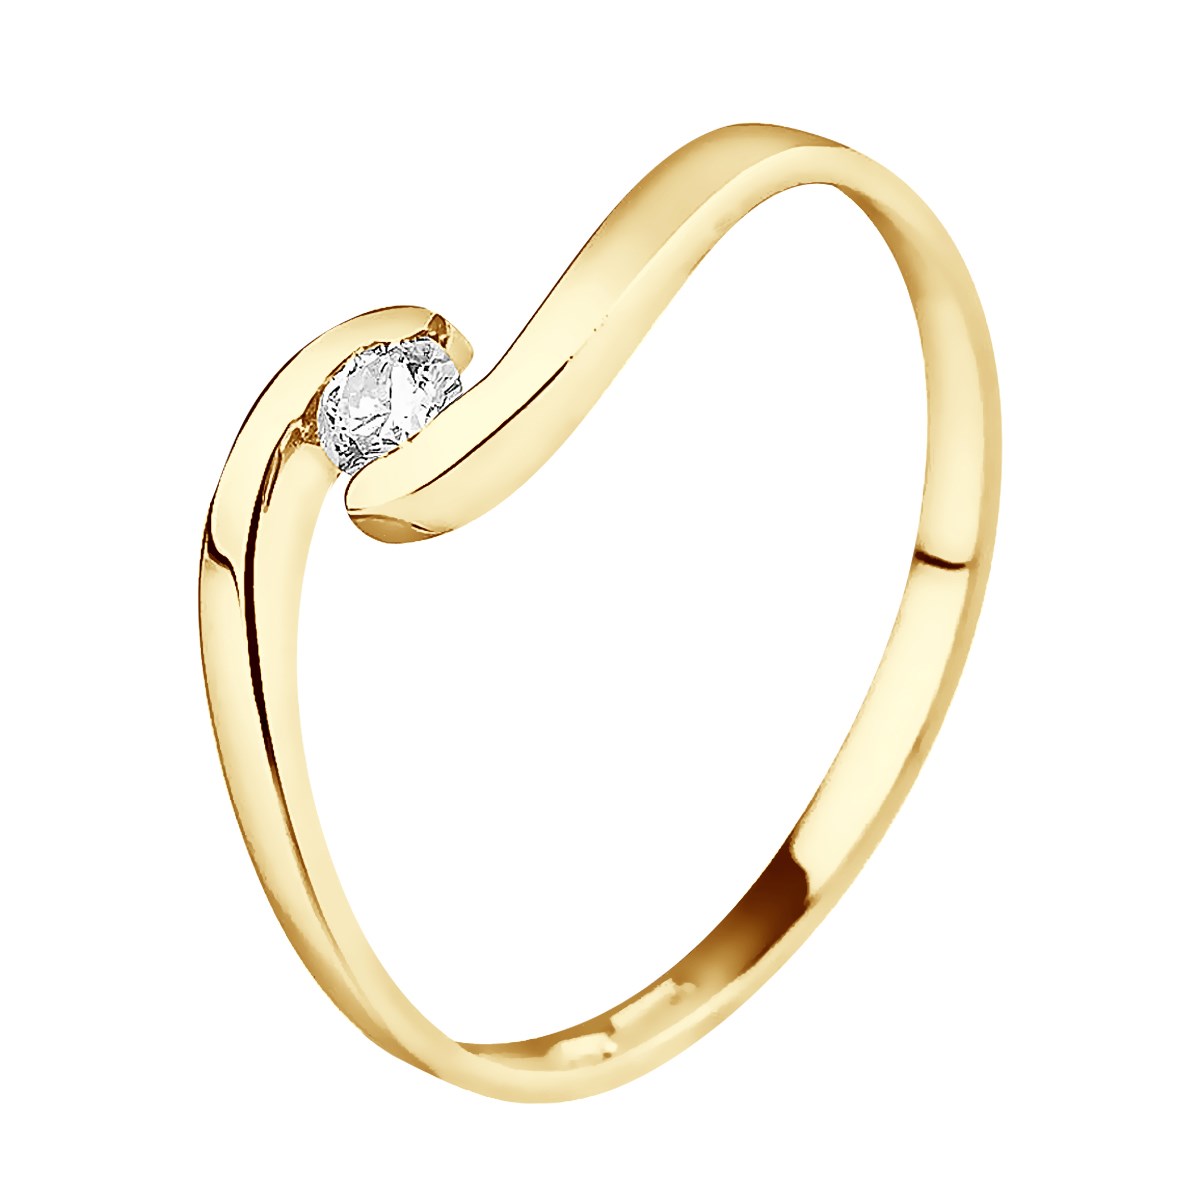 Solitaire Diamant 0,080 Cts Or Jaune 18 Carats